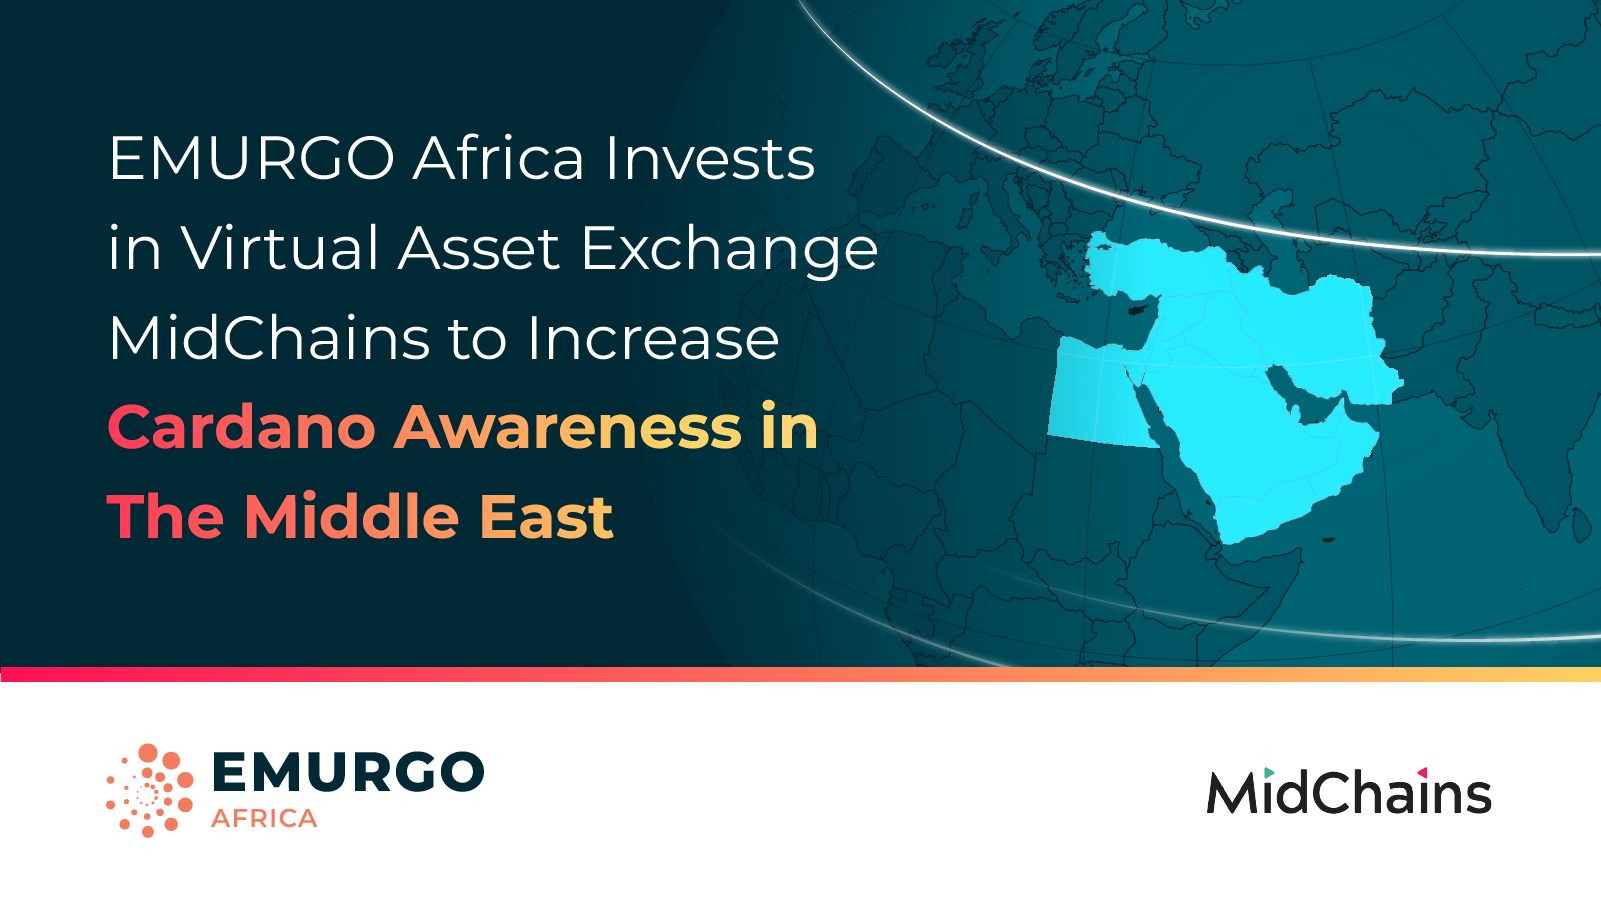 EMURGO Africa Invests in Virtual Asset Exchange MidChains to Increase Cardano Awareness in The Middle East